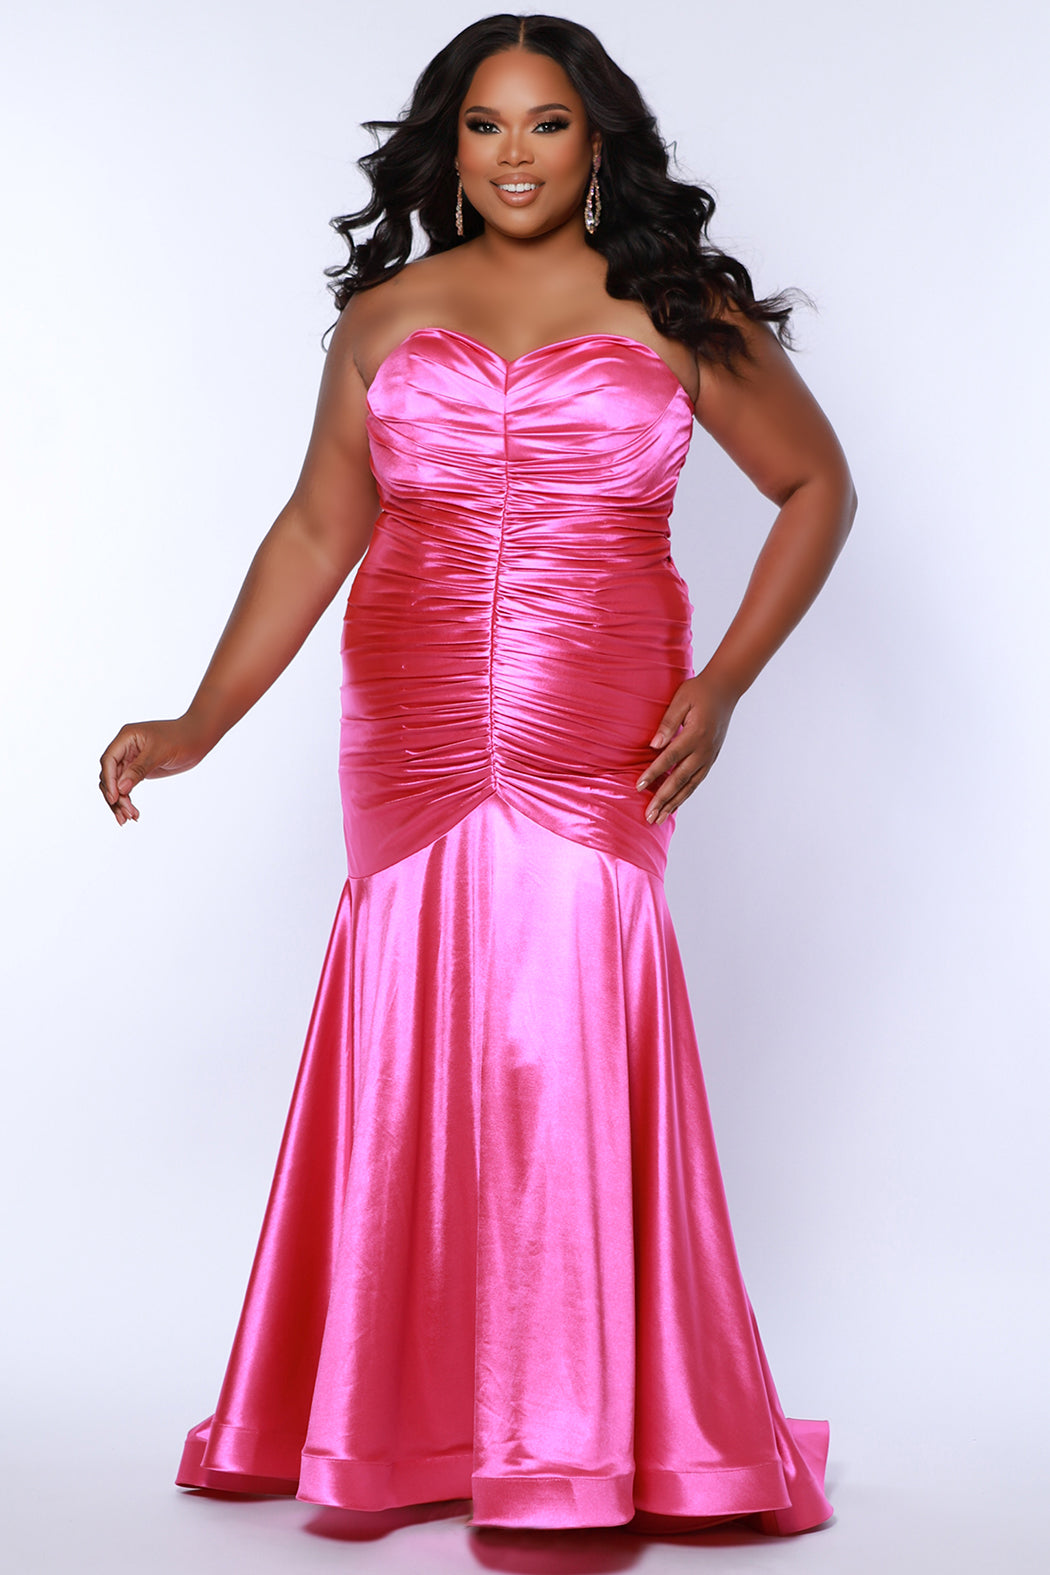 Sydney's Closet SC7364 Pink. Stretch Satin, Stretch knit lining, Fitted silhouette, Strapless Sweetheart bodice, optional spaghetti straps, Ruched front and back bodice, Invisible center back zipper, Sweep train, Horsehair hem